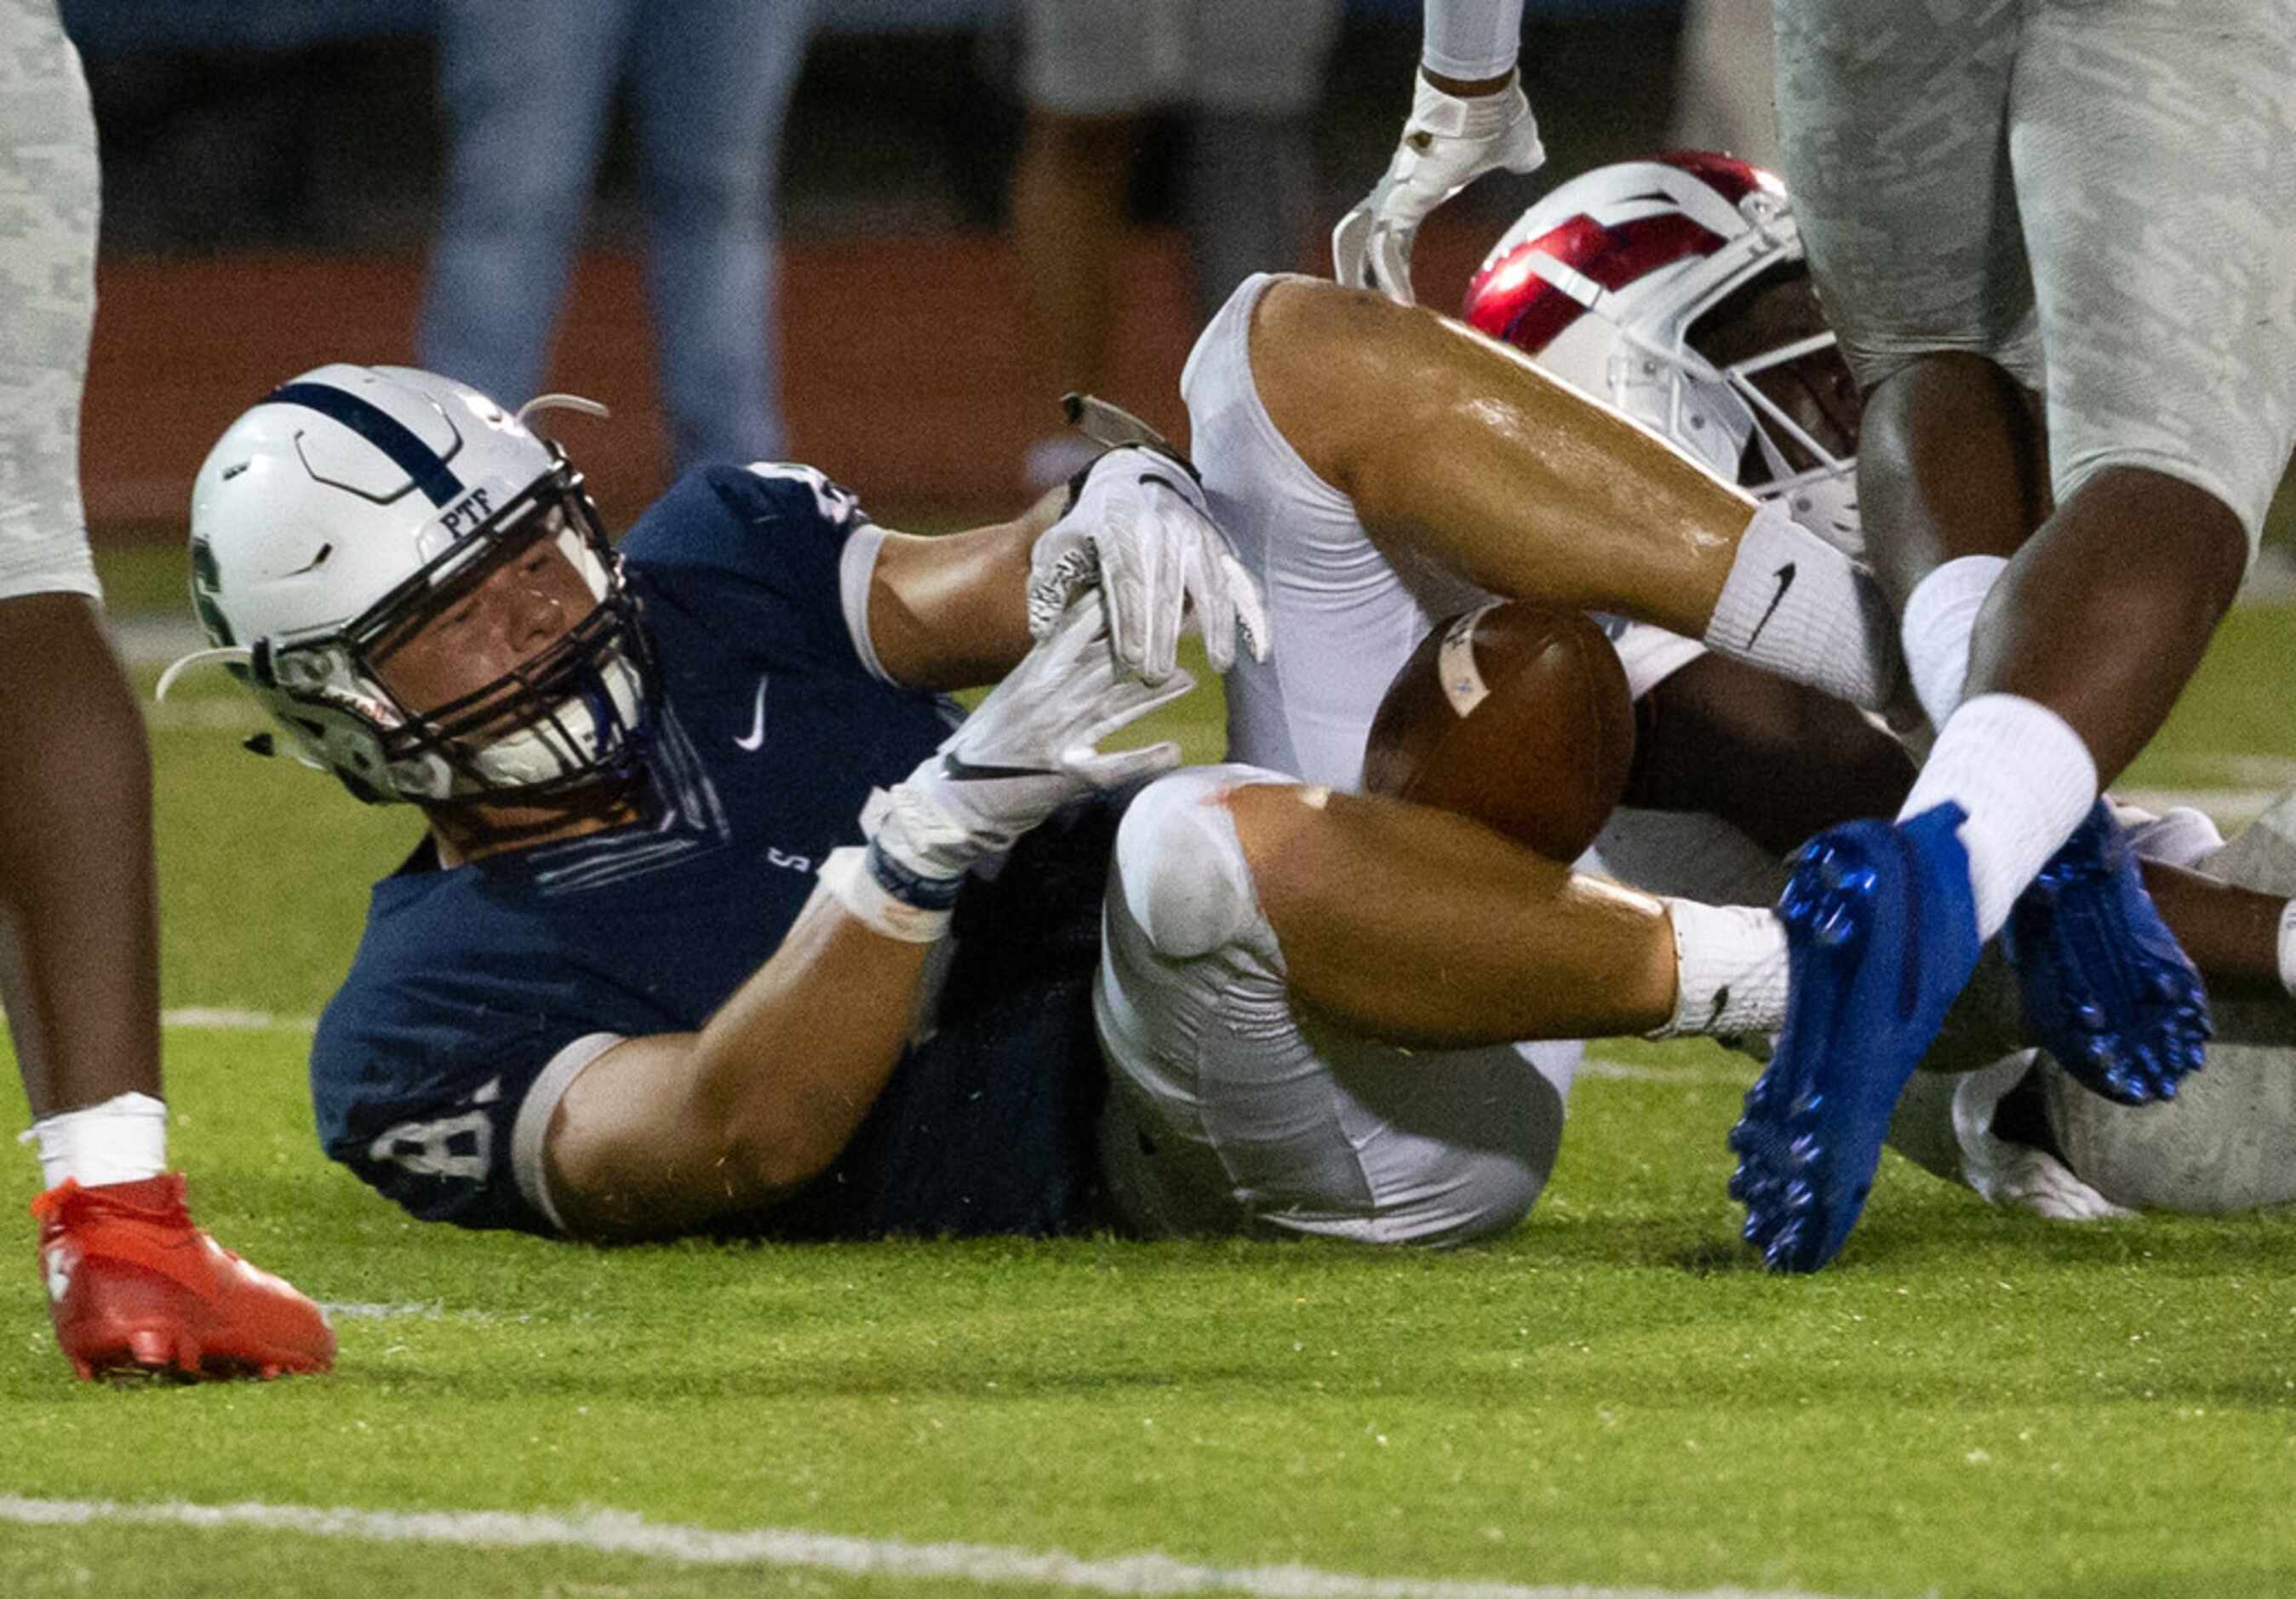 All Saints' Episcopal tight end Mitchell Bothwell (81) gets sacked during a play in a game...